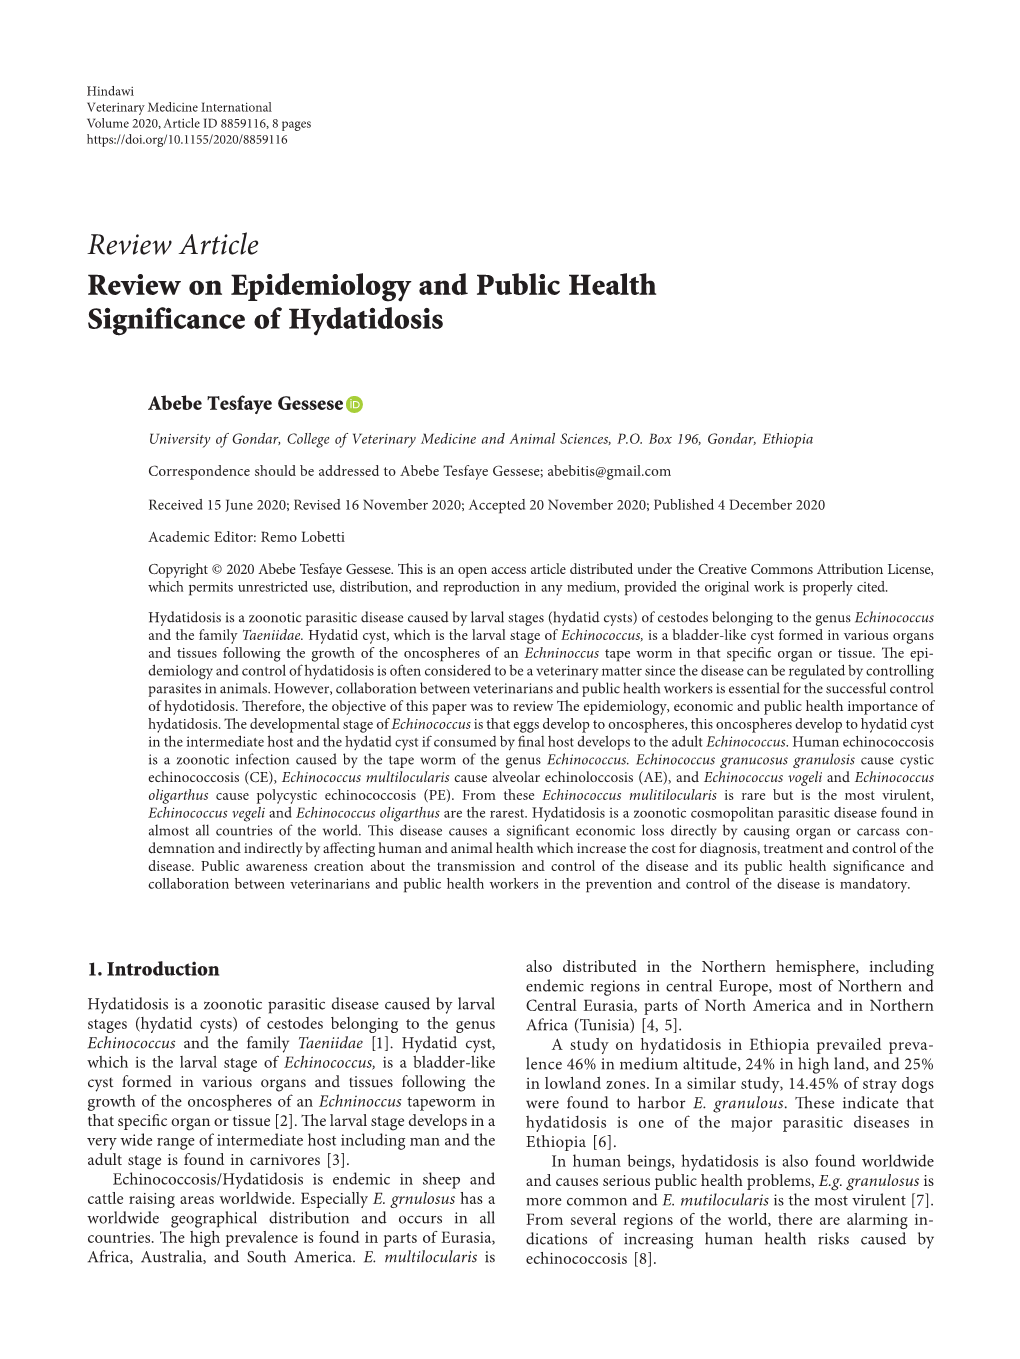 Review Article Review on Epidemiology and Public Health Significance of Hydatidosis